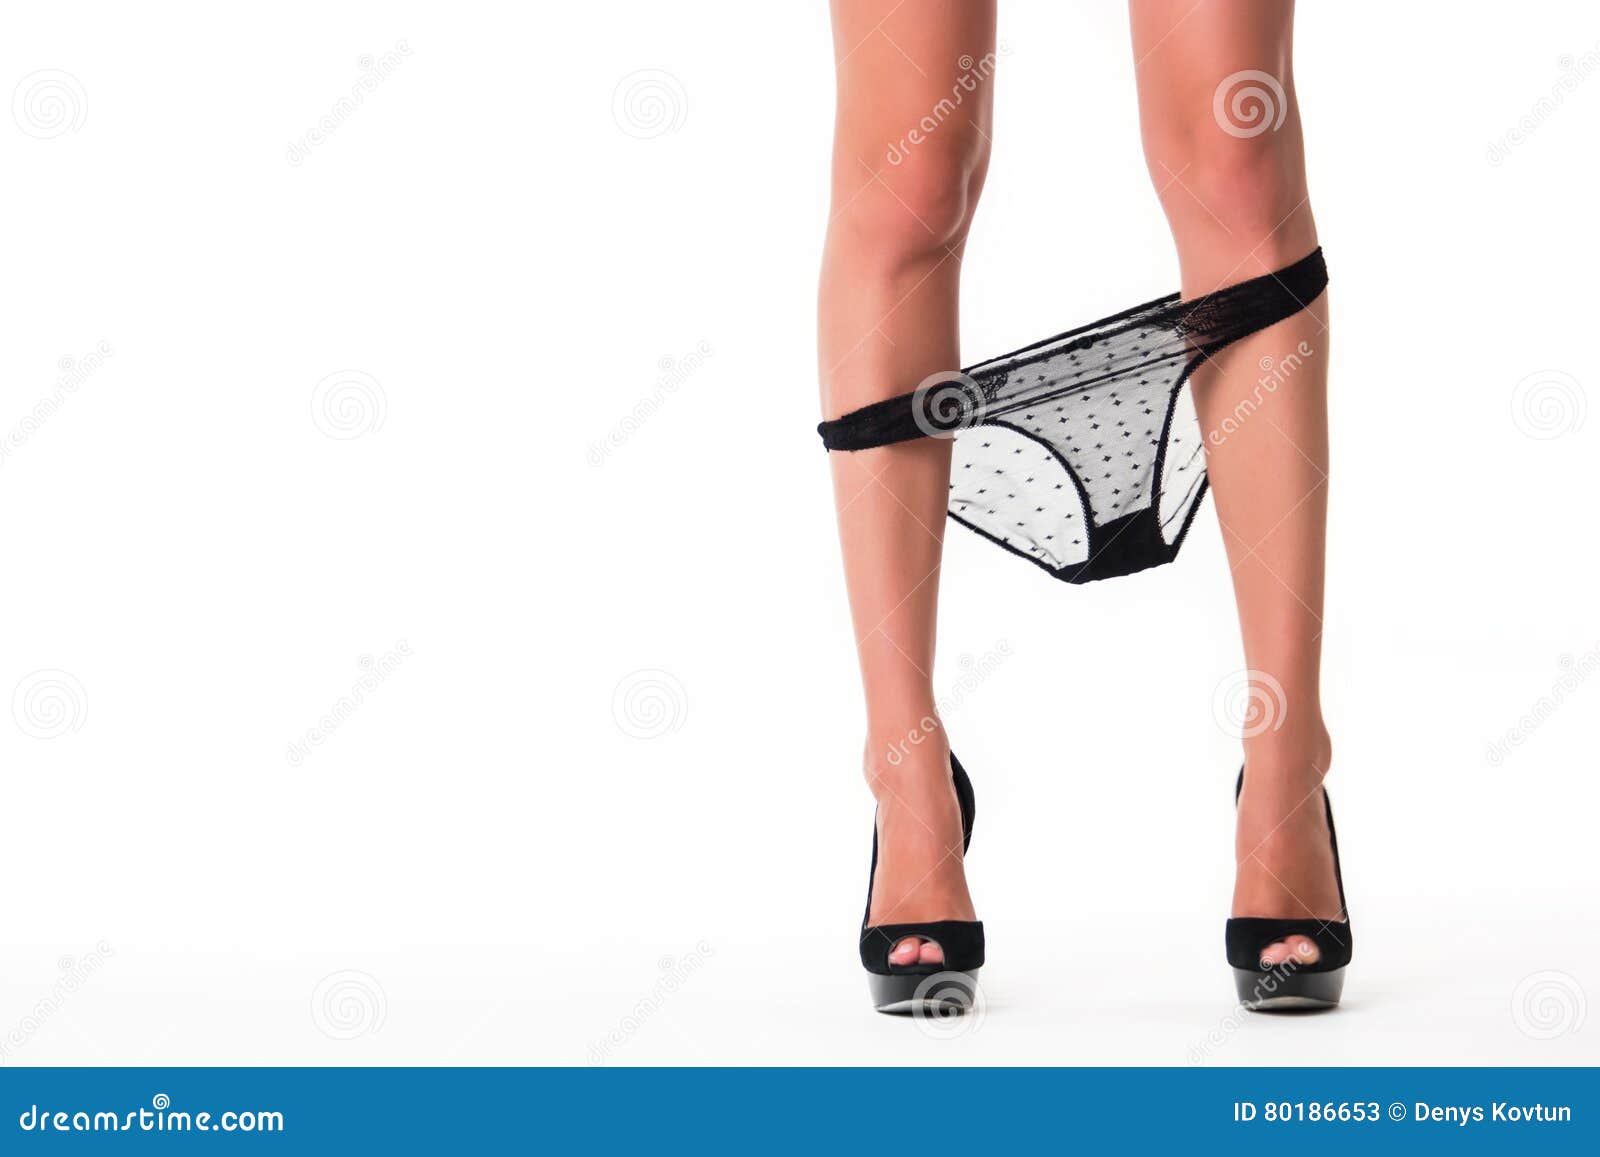 Female Legs with Panties Down. Stock Image - Image of isolated